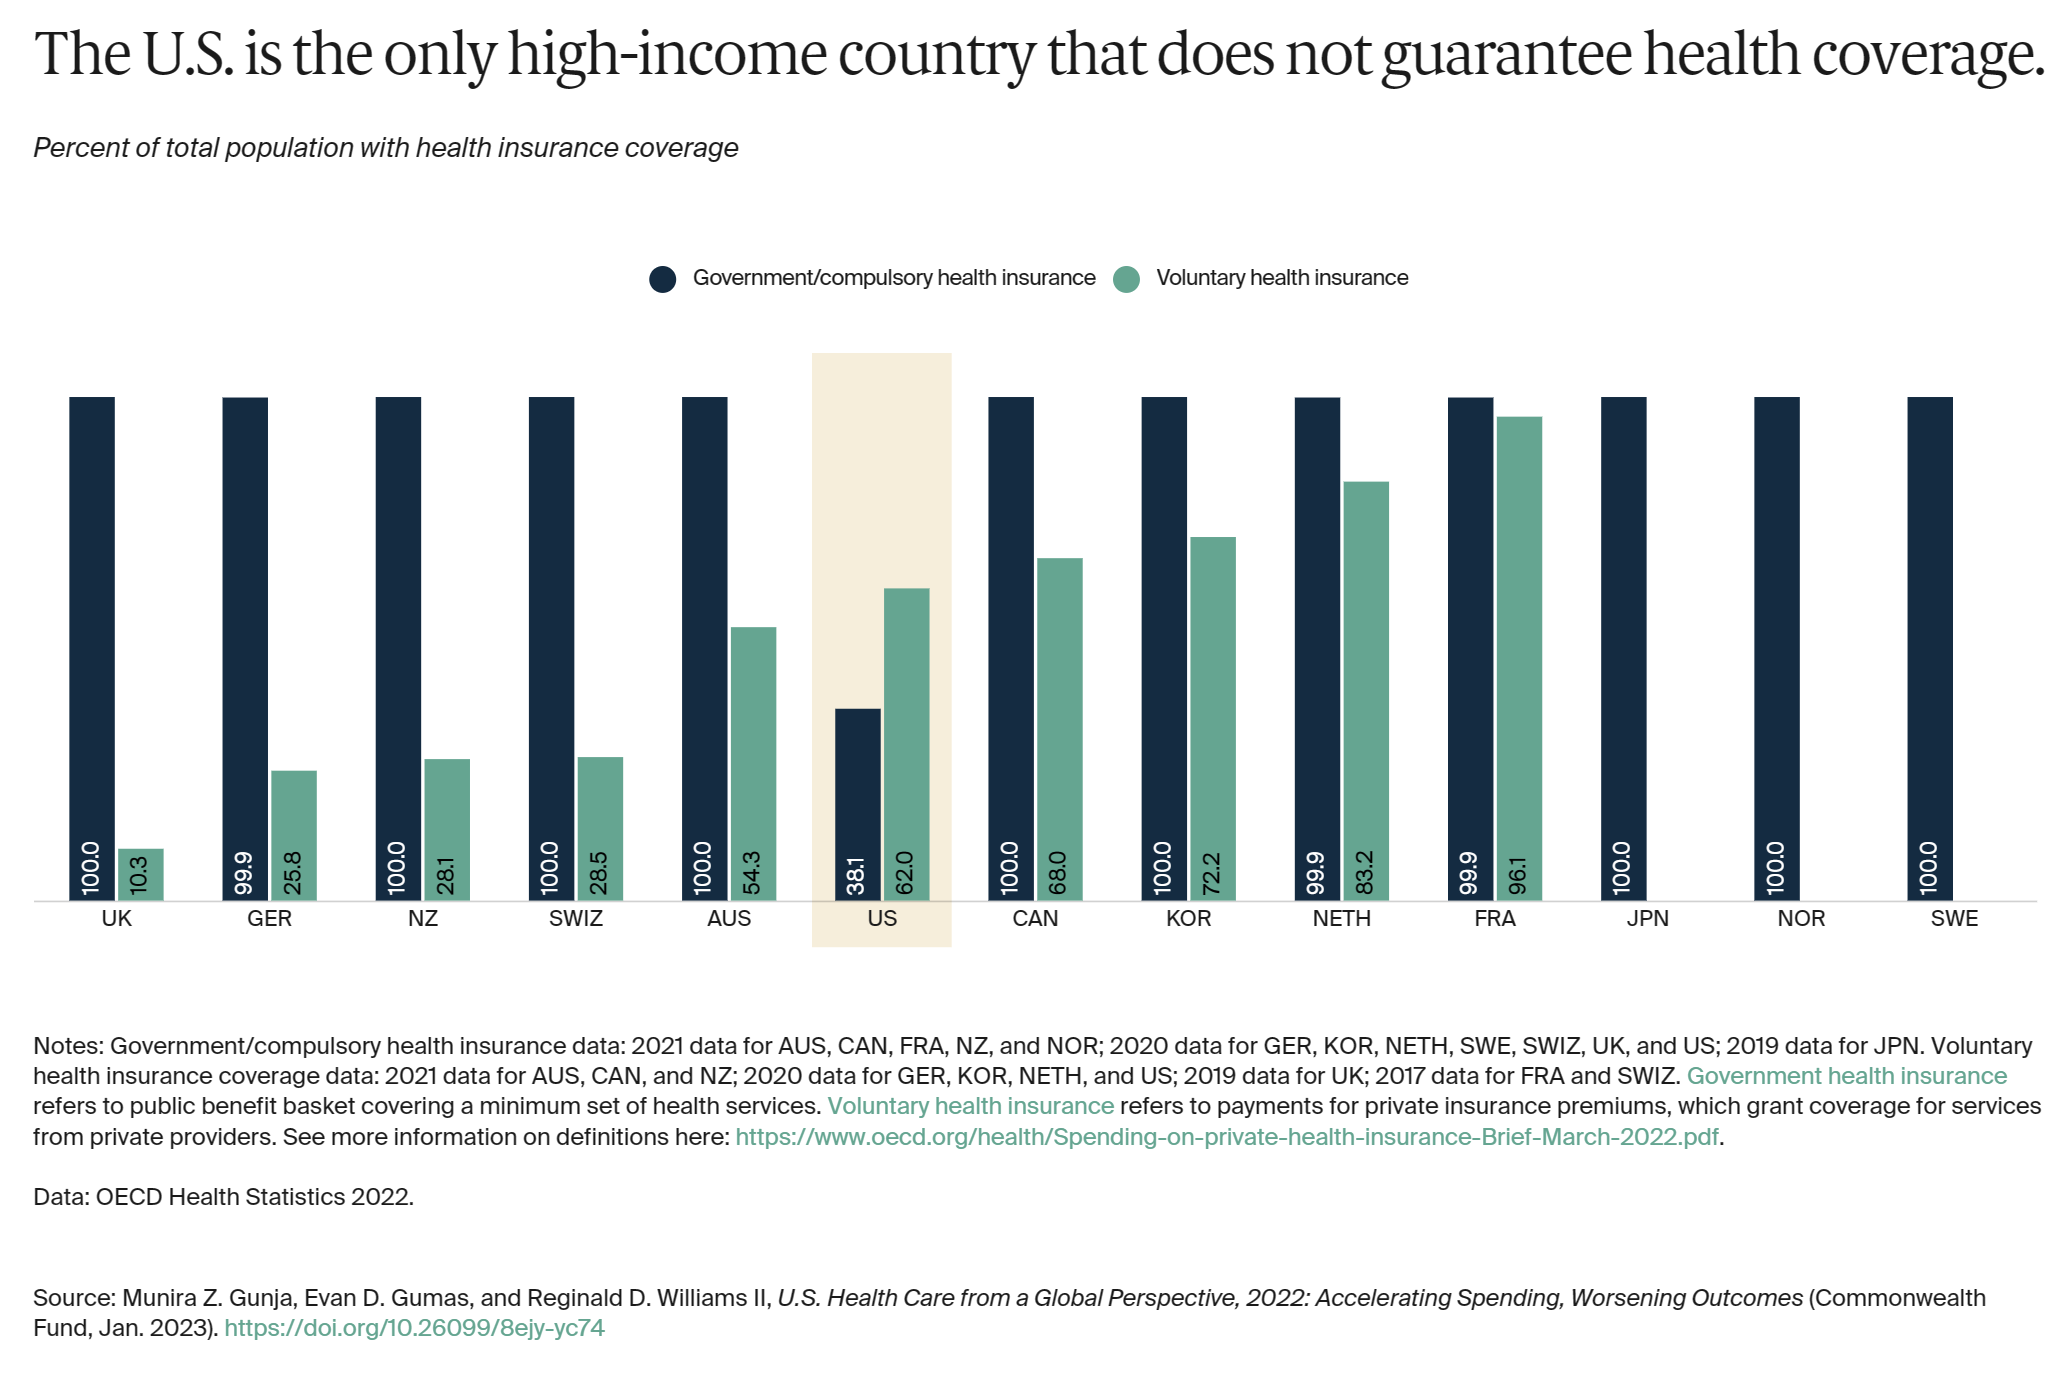 Percent of total population with health insurance coverage in OECD nations in 2021. The U.S. is the only high-income country that does not guarantee health coverage. Graphic: The Commonwealth Fund